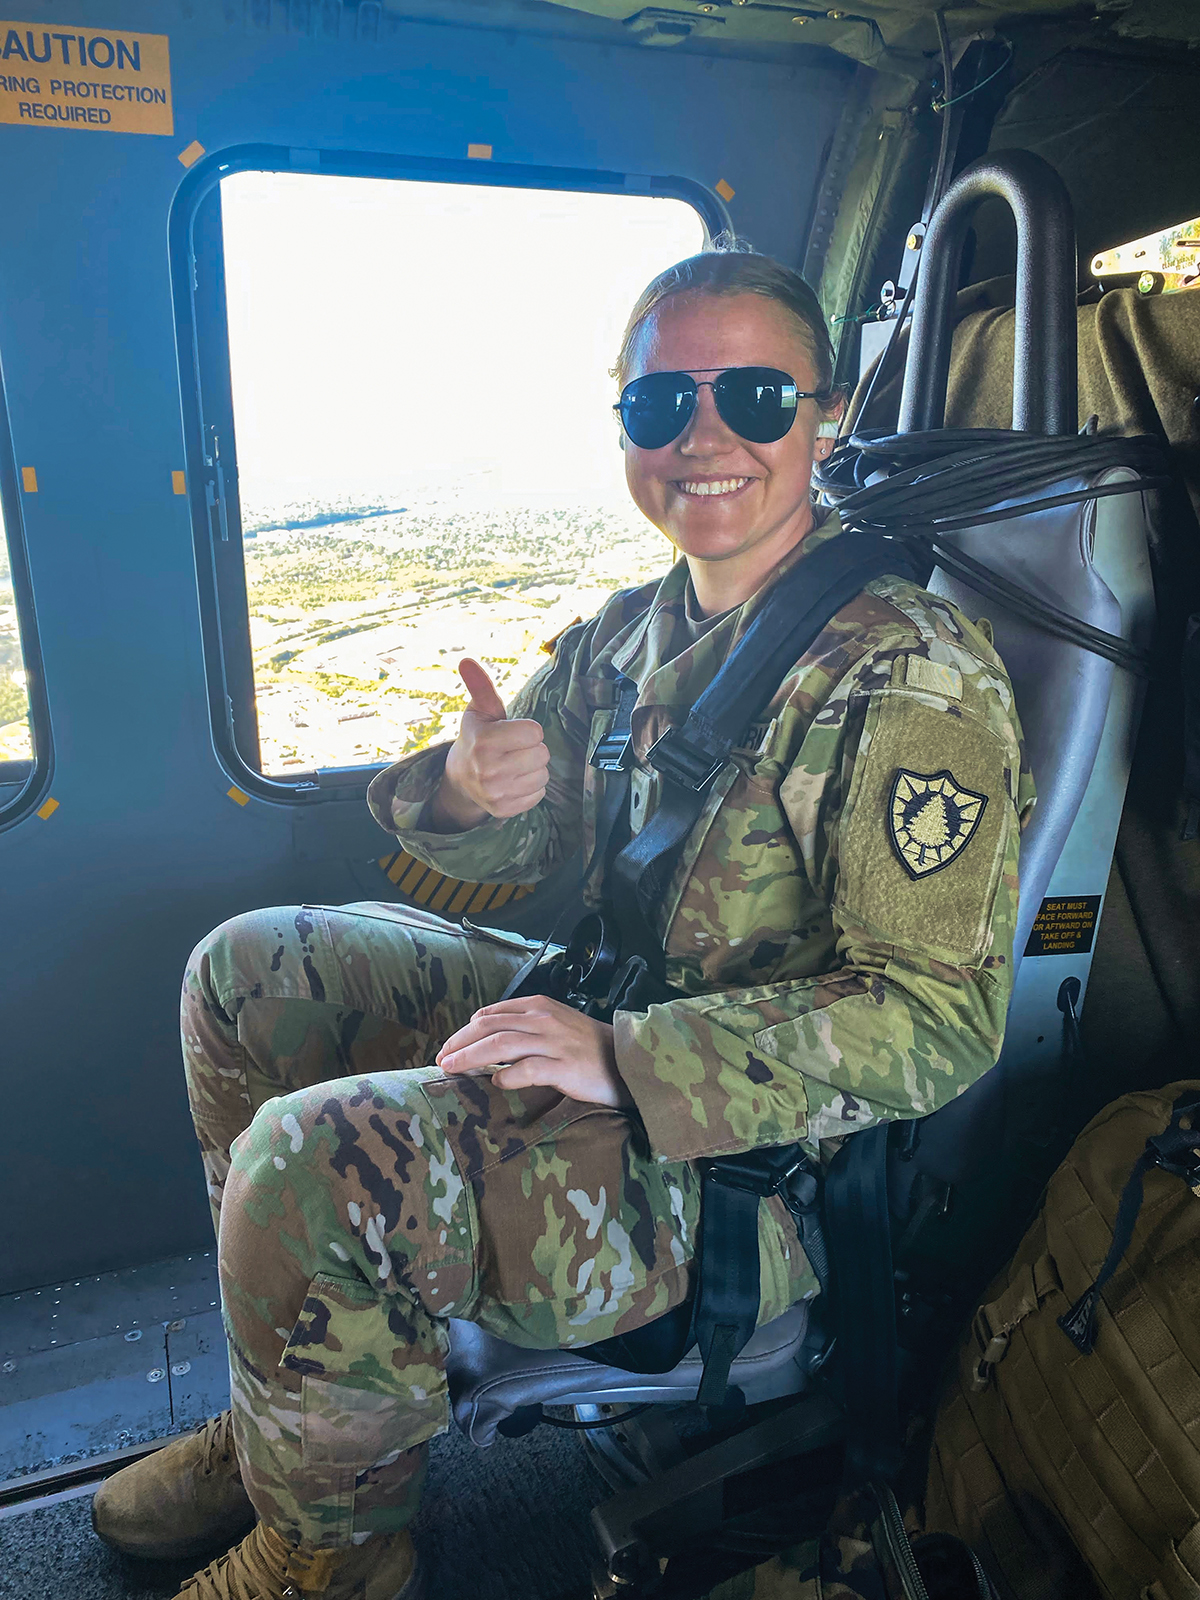 A young woman wearing sunglasses and green fatigues is strapped into an aircraft seat smiling and giving a thumbs up to the camera.